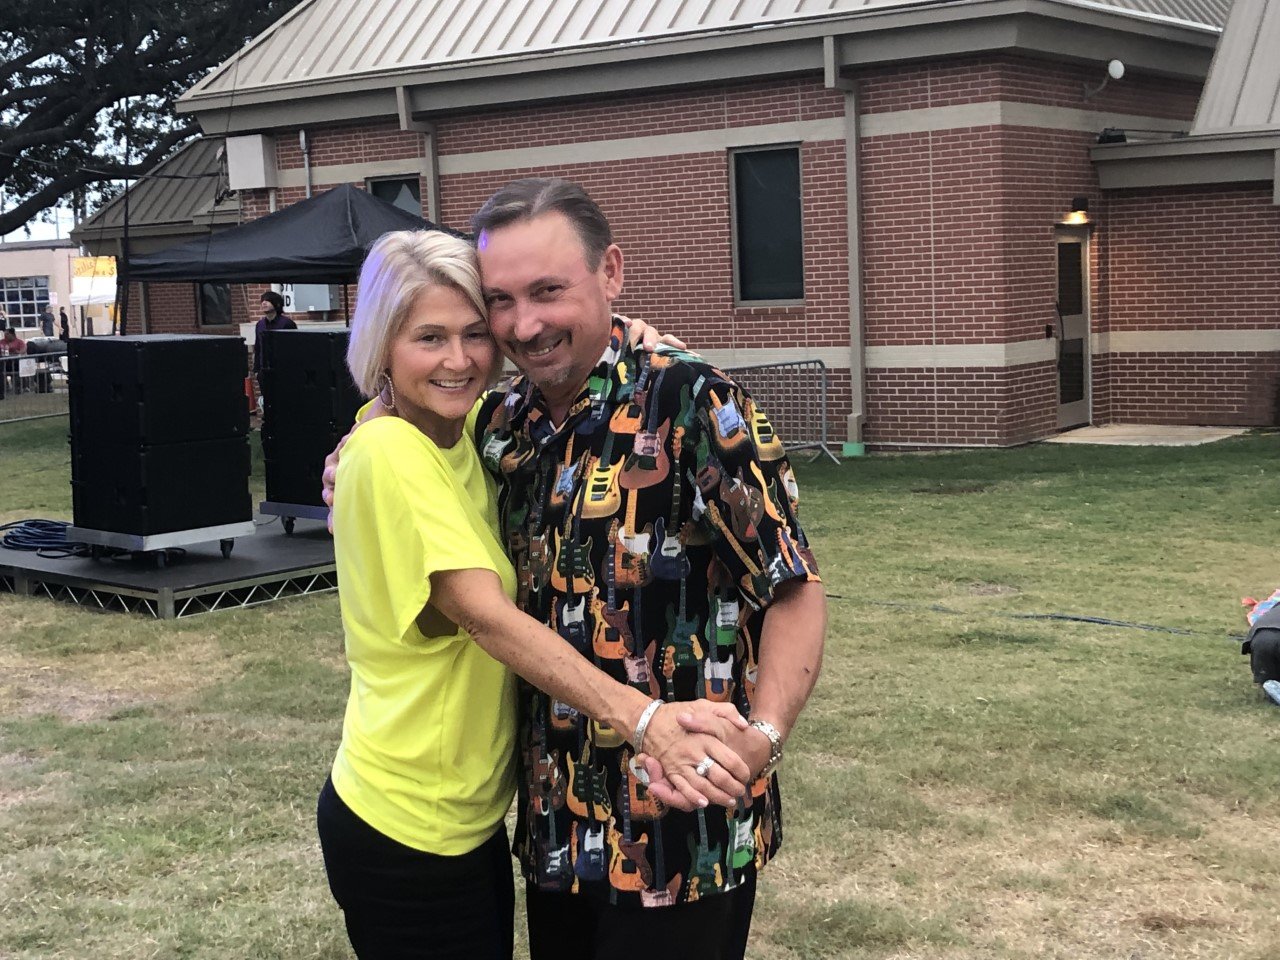 Kim and Robert Zientek enjoy a dance at the Katy Rice Festival Oct. 7 in downtown Katy. The Rice Festival, a Katy staple for decades, enjoyed good crowds and good weather over the weekend.